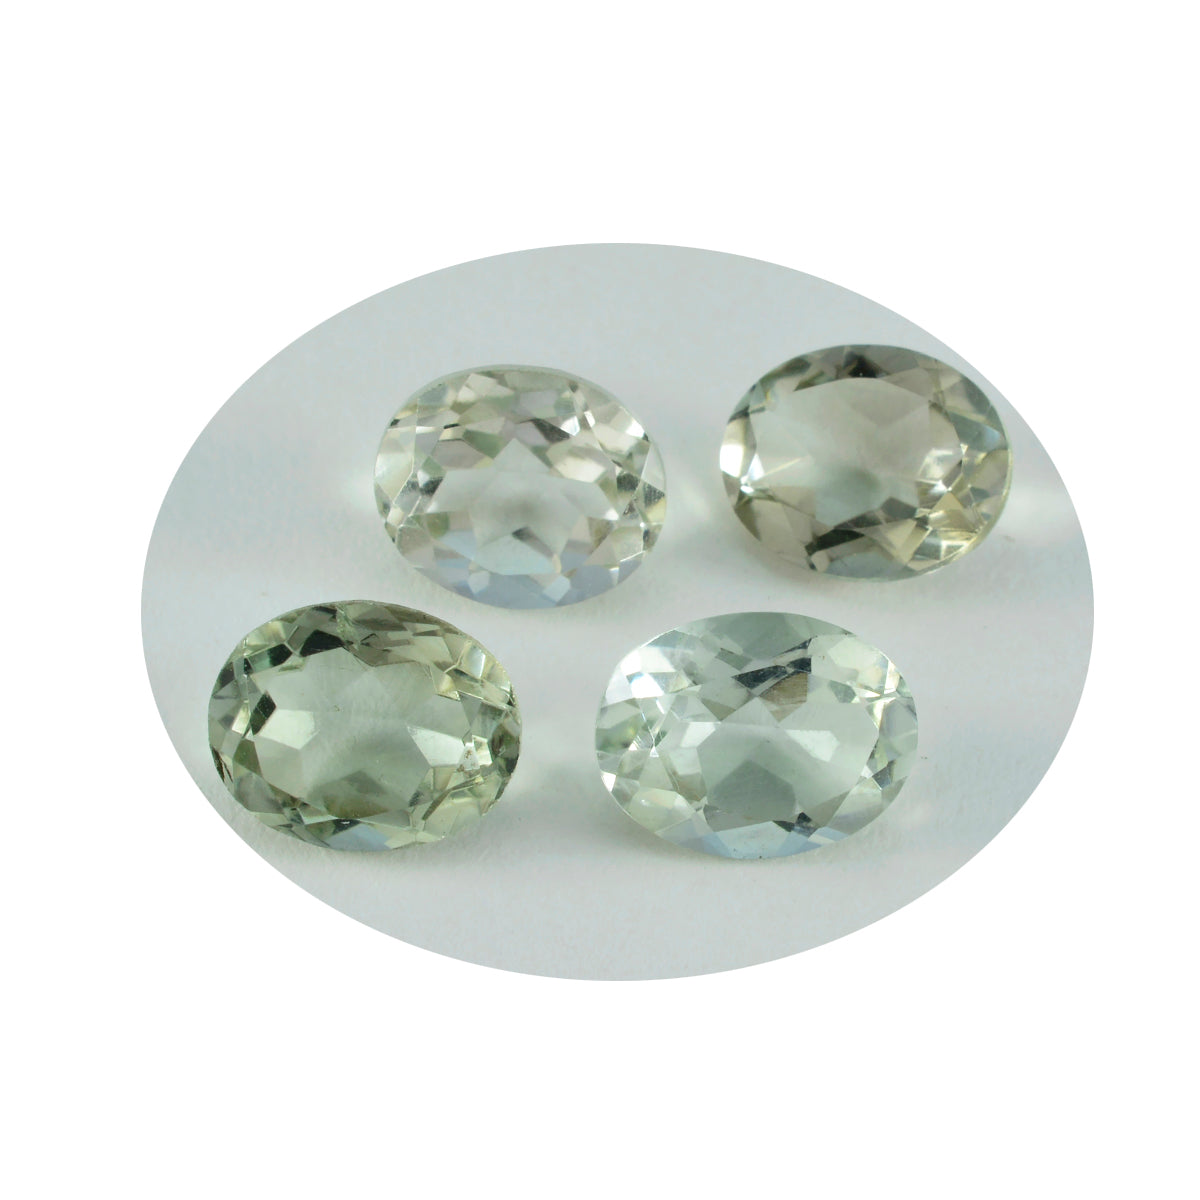 Riyogems 1PC Green Amethyst Faceted 8x10 mm Oval Shape beauty Quality Loose Stone